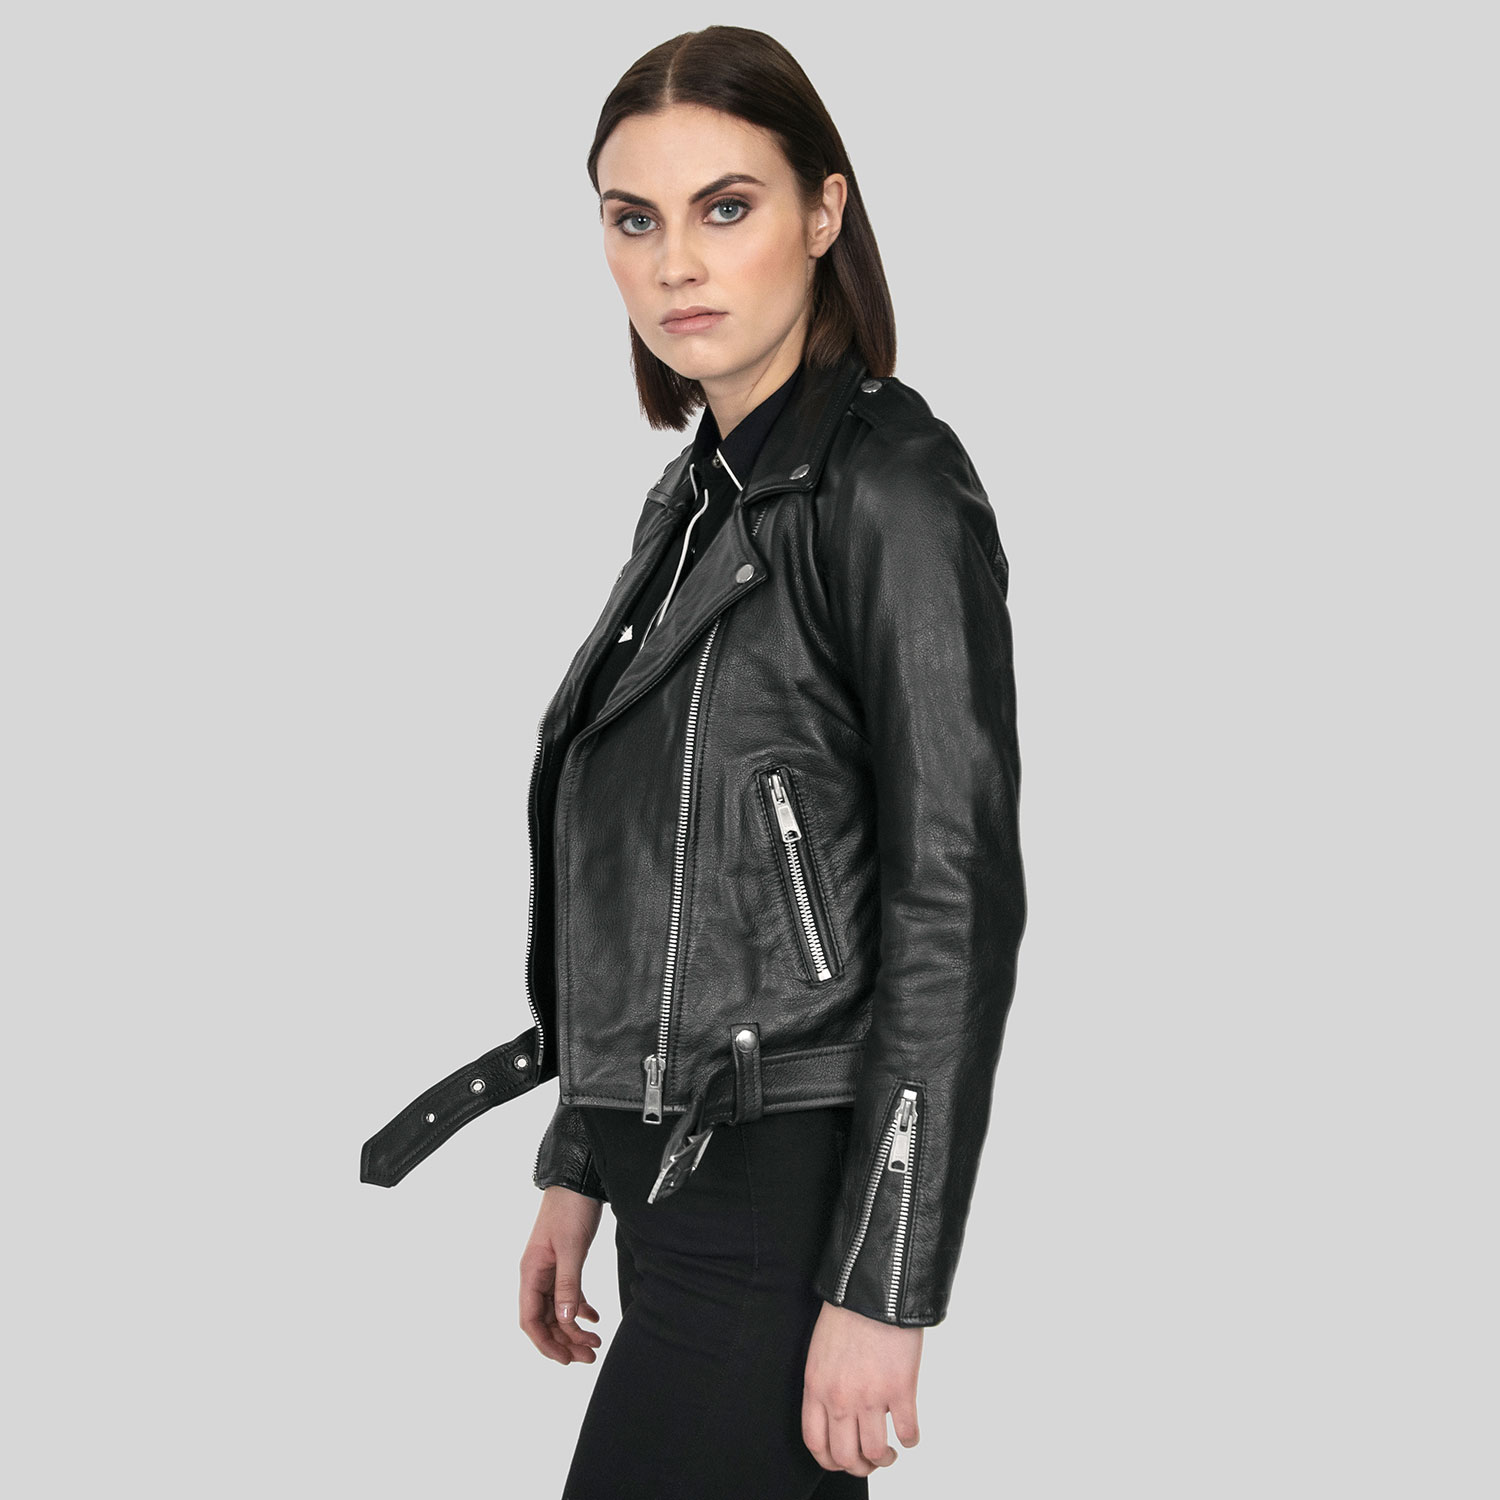 Commando - Black and Hell | Straight - Leather Jacket Lining - To Nickel Black Apparel